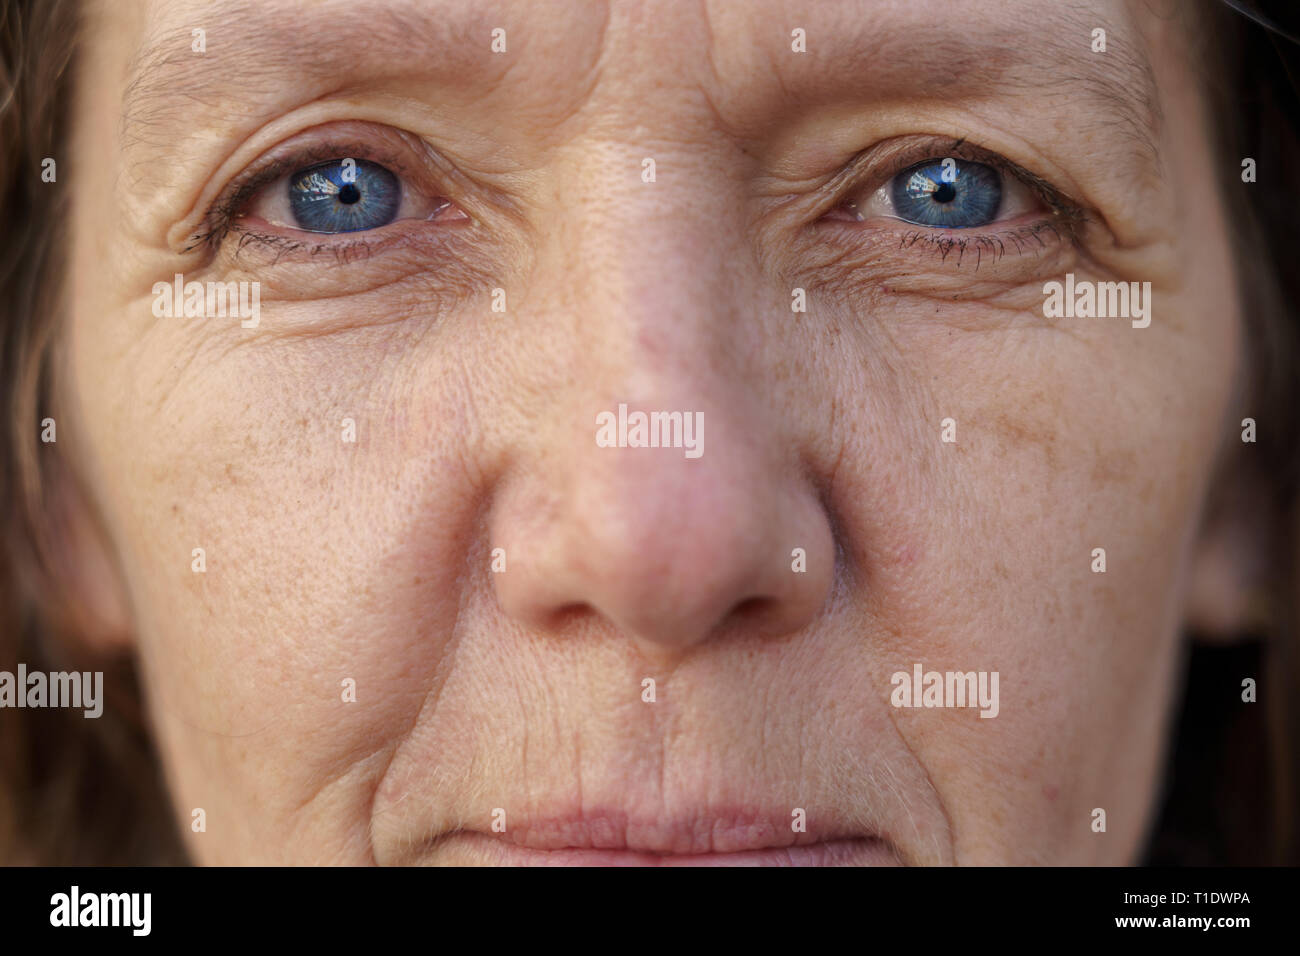 Cropped face of a blue-eyed middle-aged woman with wrinkled skin looking into the lens in a concept of ageing Stock Photo